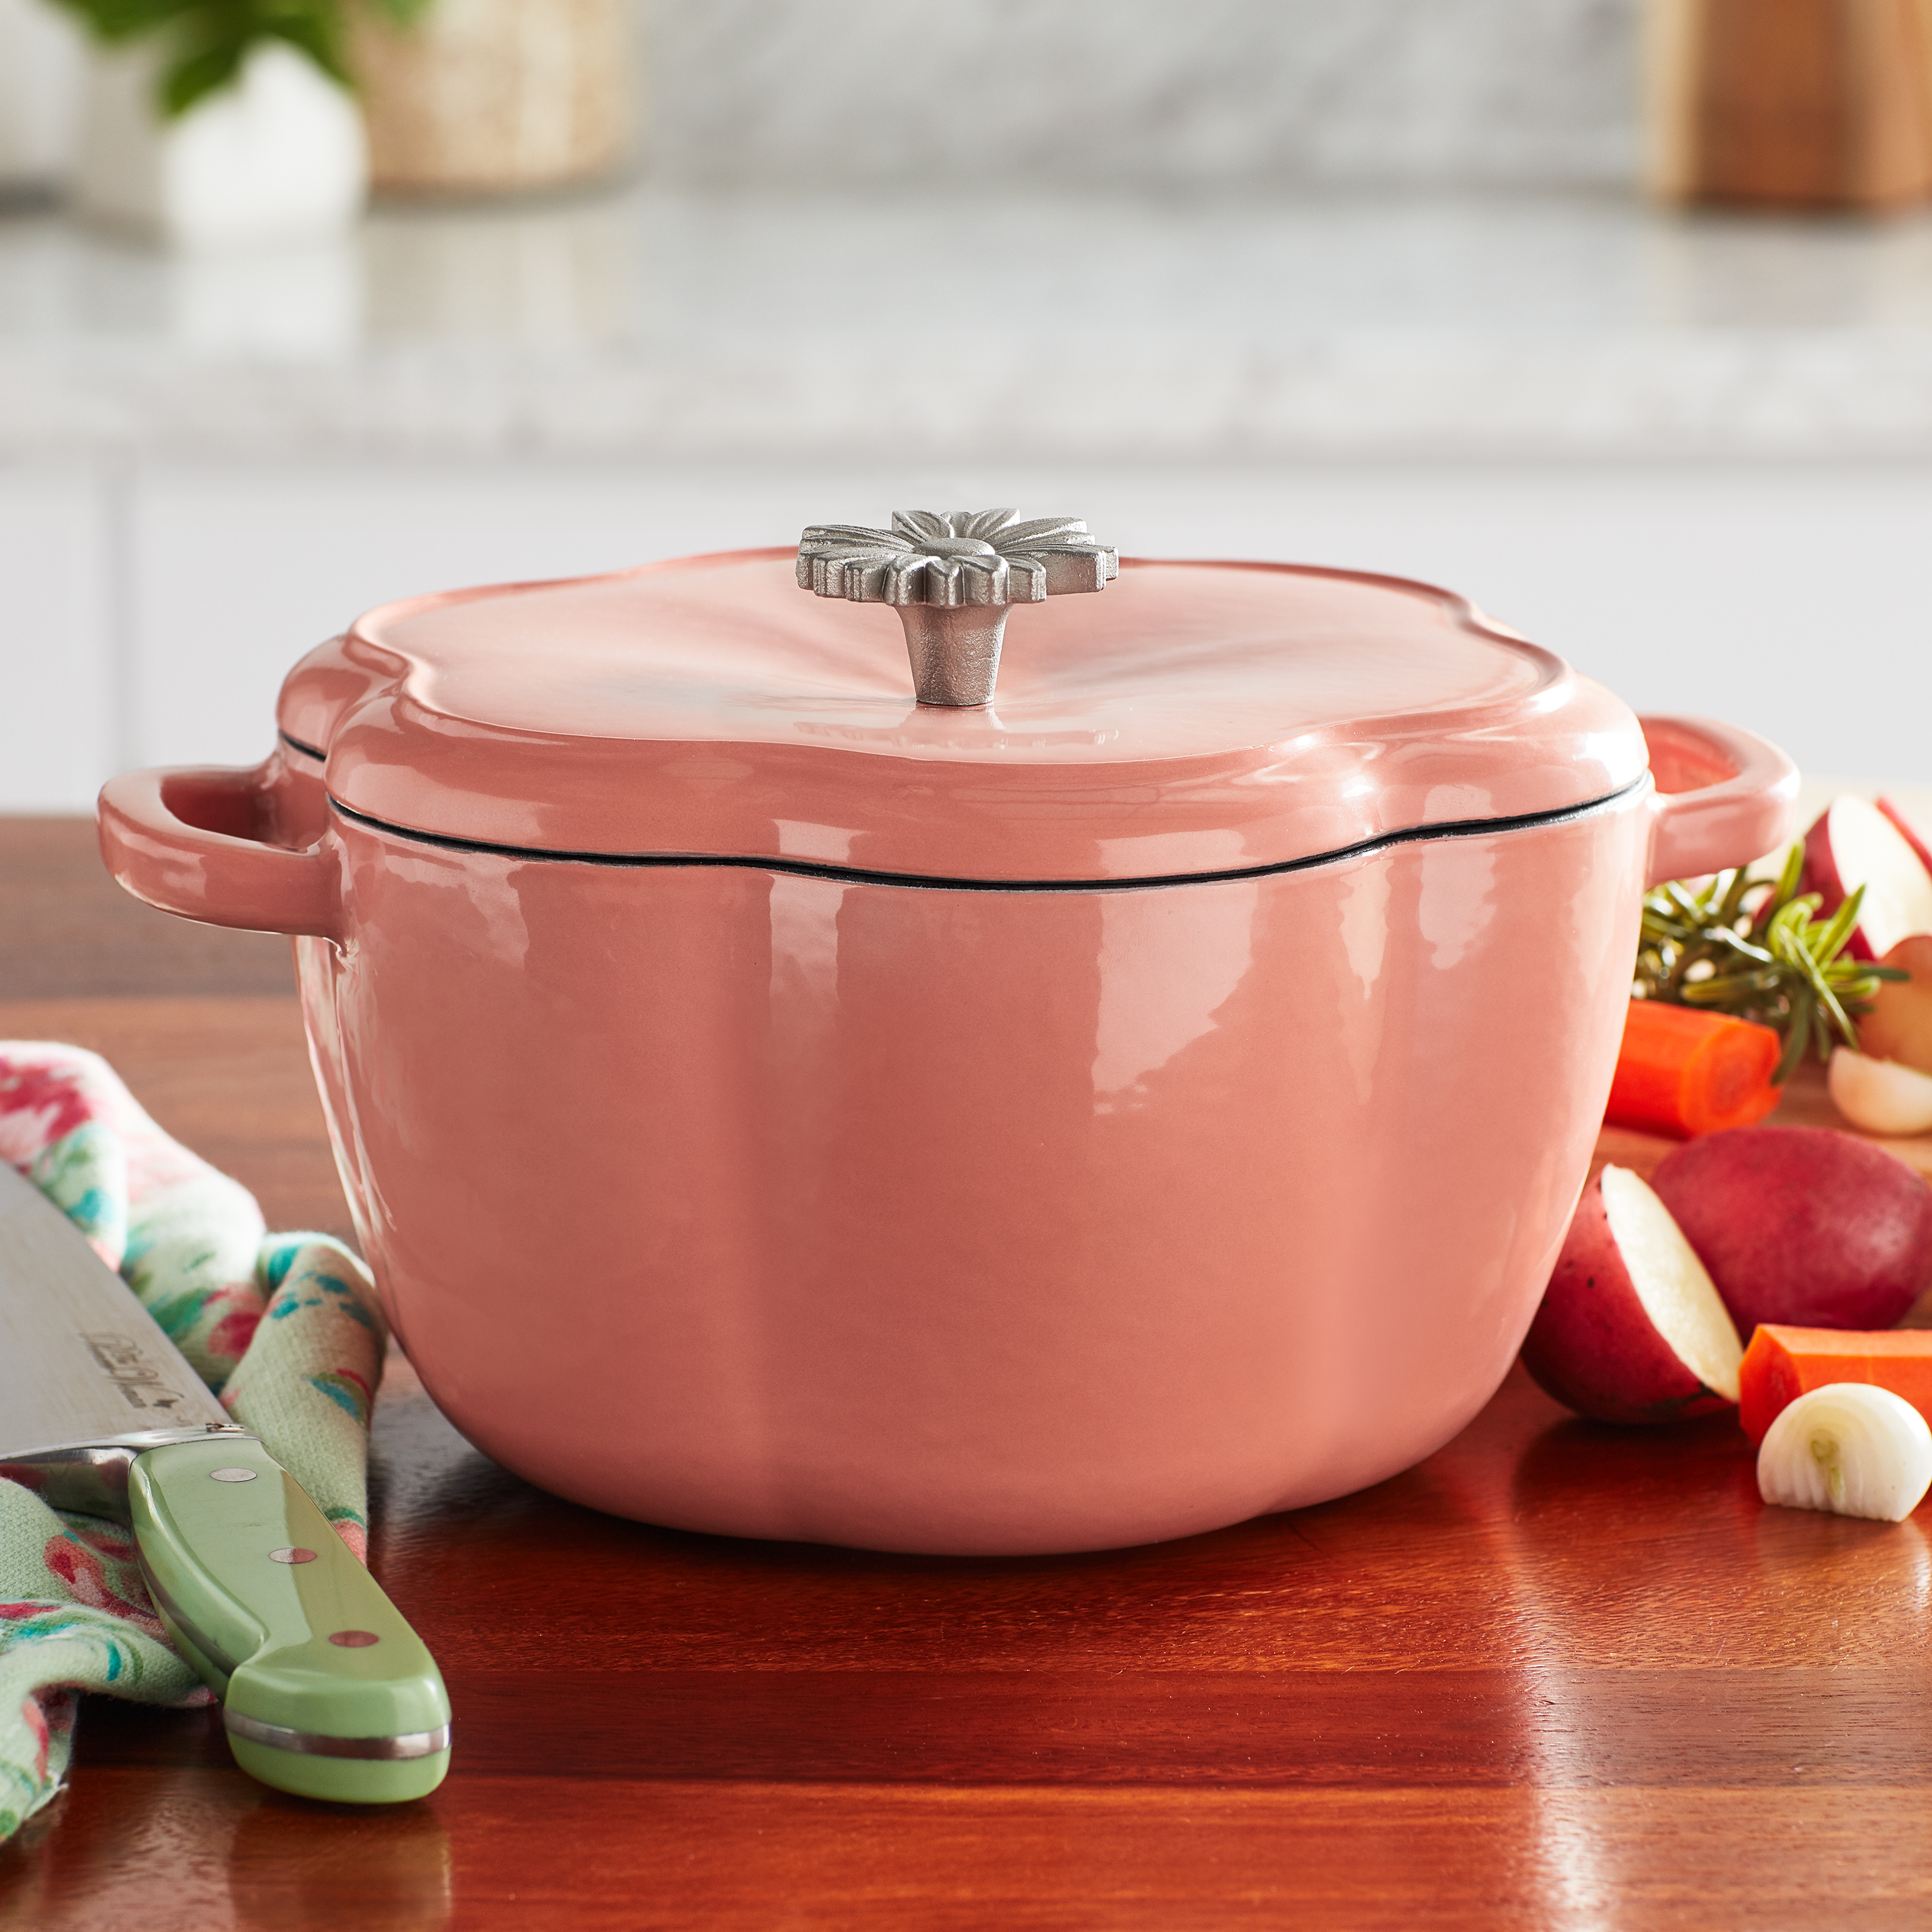 The Pioneer Woman Timeless Beauty Enamel on Cast Iron 3-Quart Dutch Oven, Pink - image 2 of 9